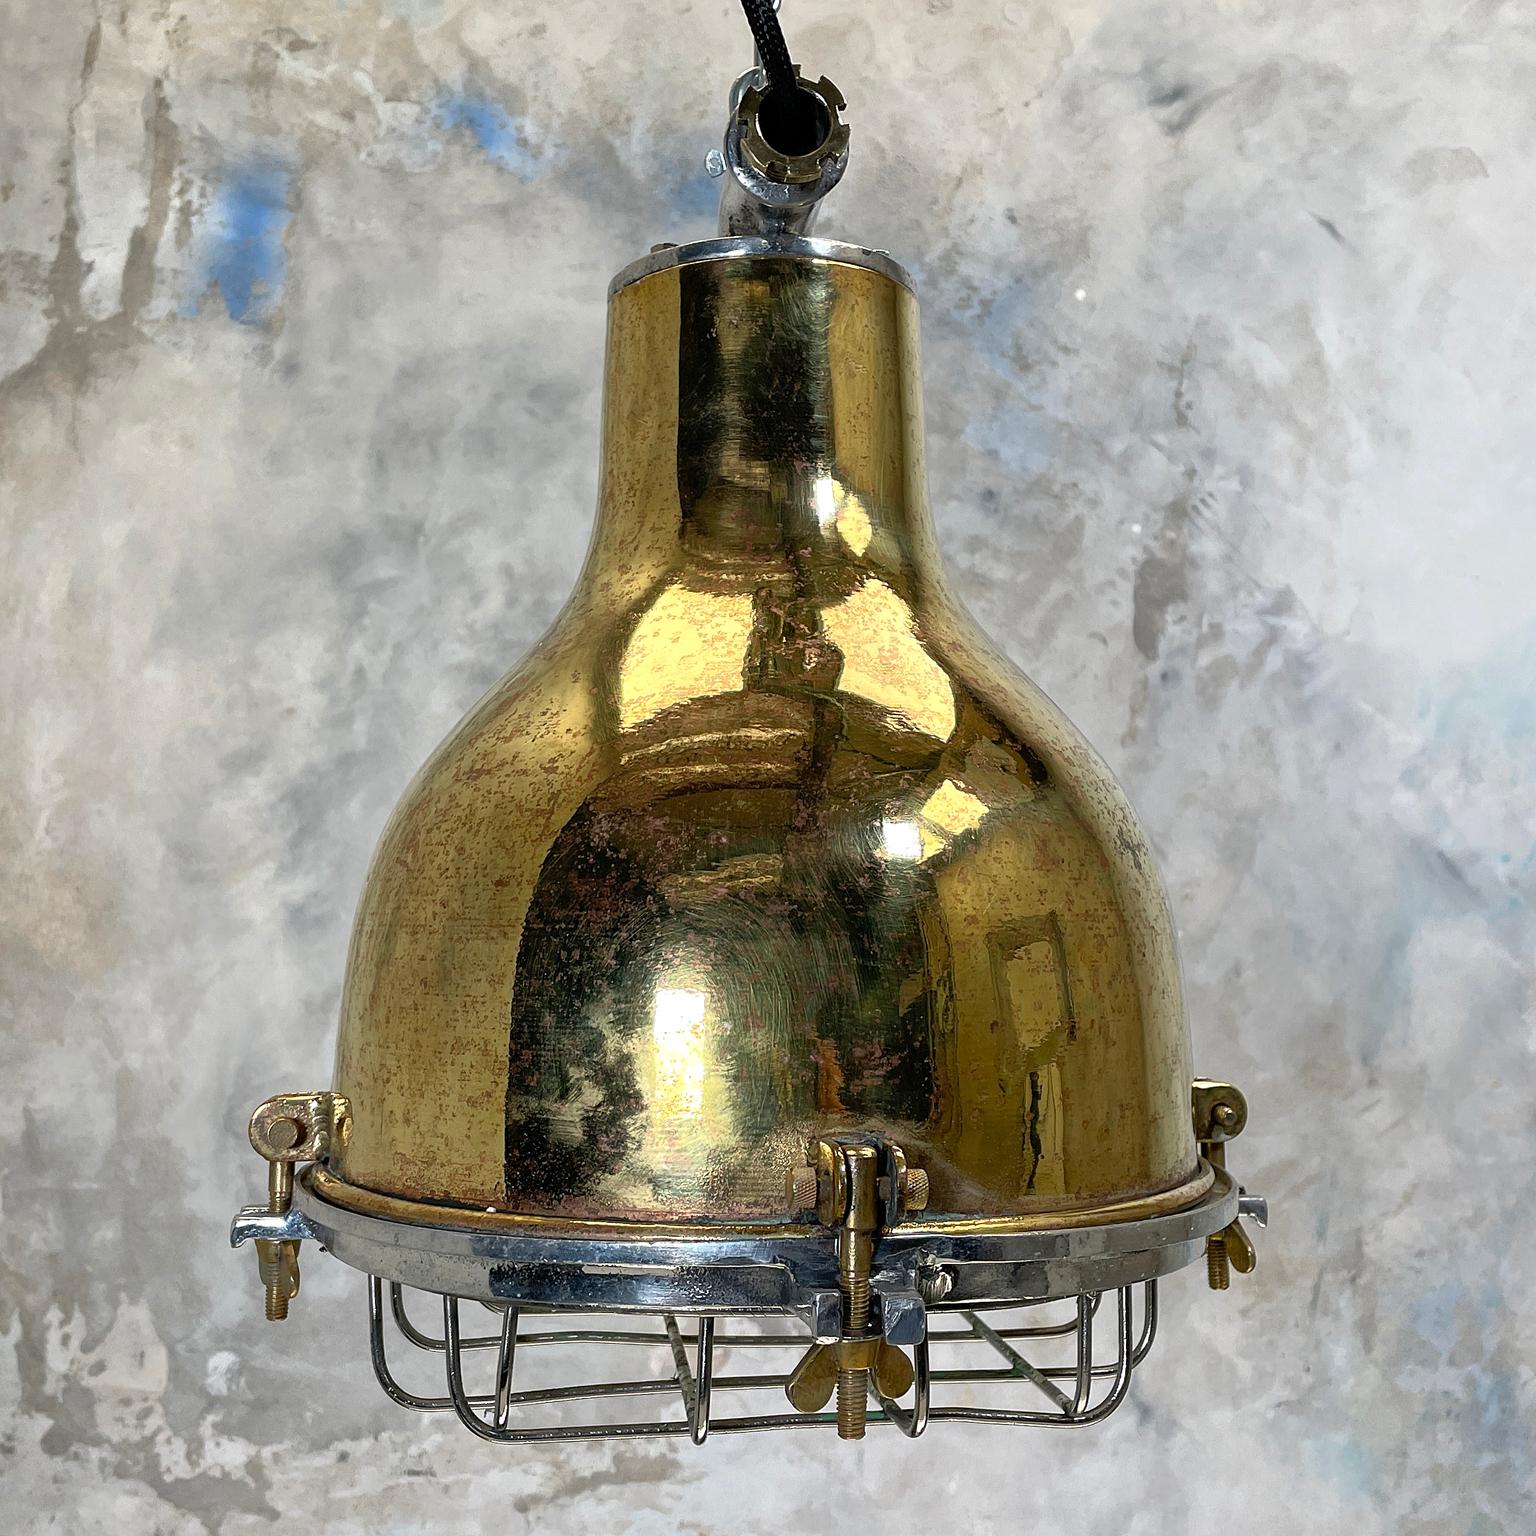 Cast 1980's Japanese Industrial Brass, Aluminium & Glass Dome Pendant Lamp with Cage